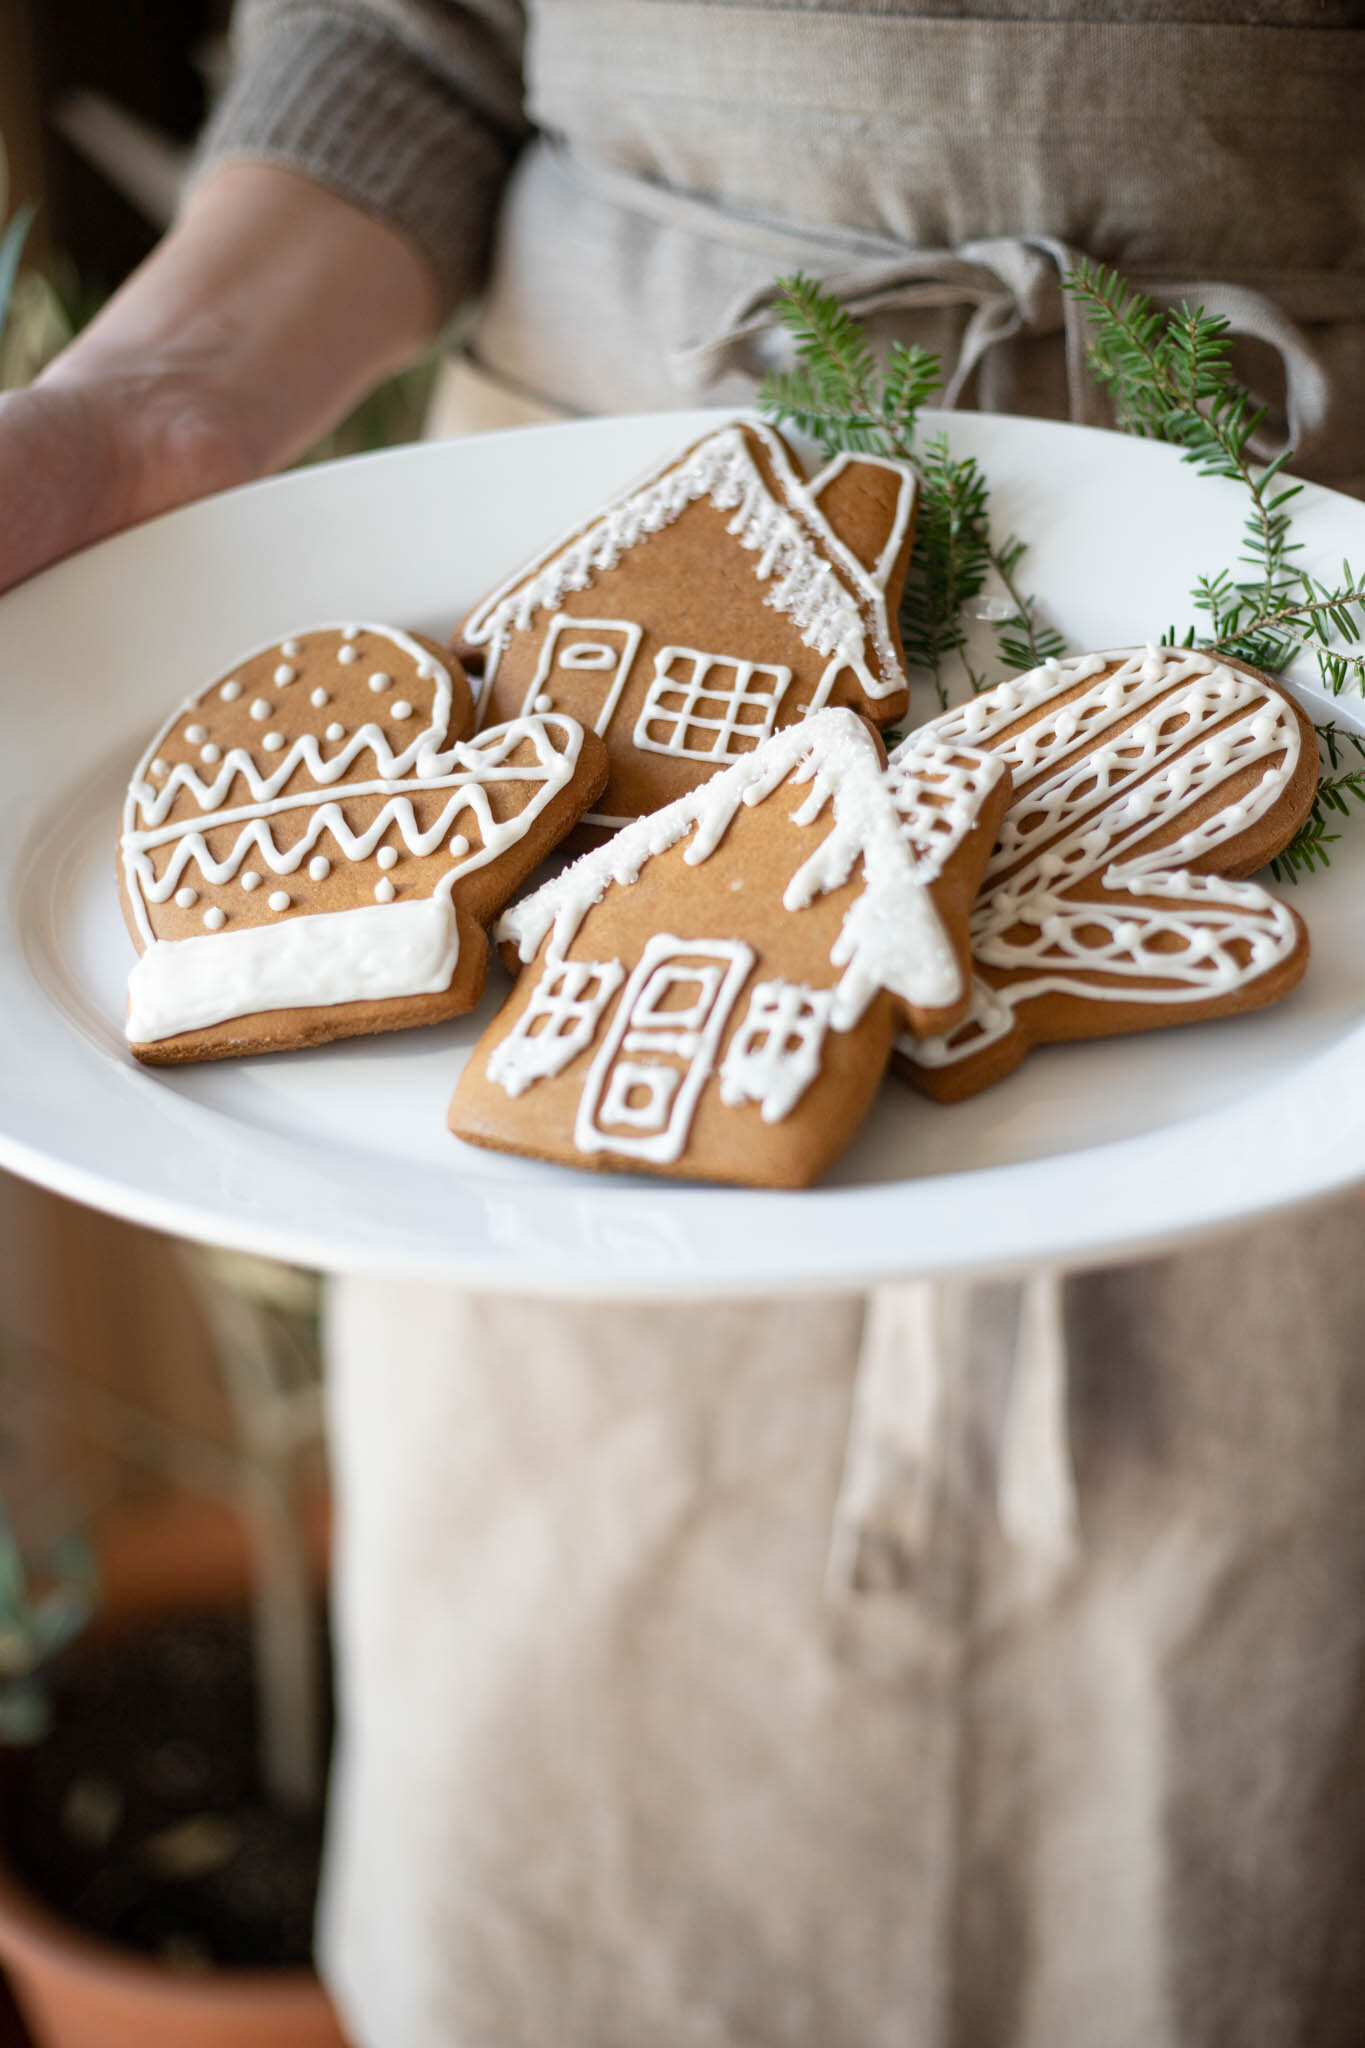 Gingerbread Men - To Simply Inspire